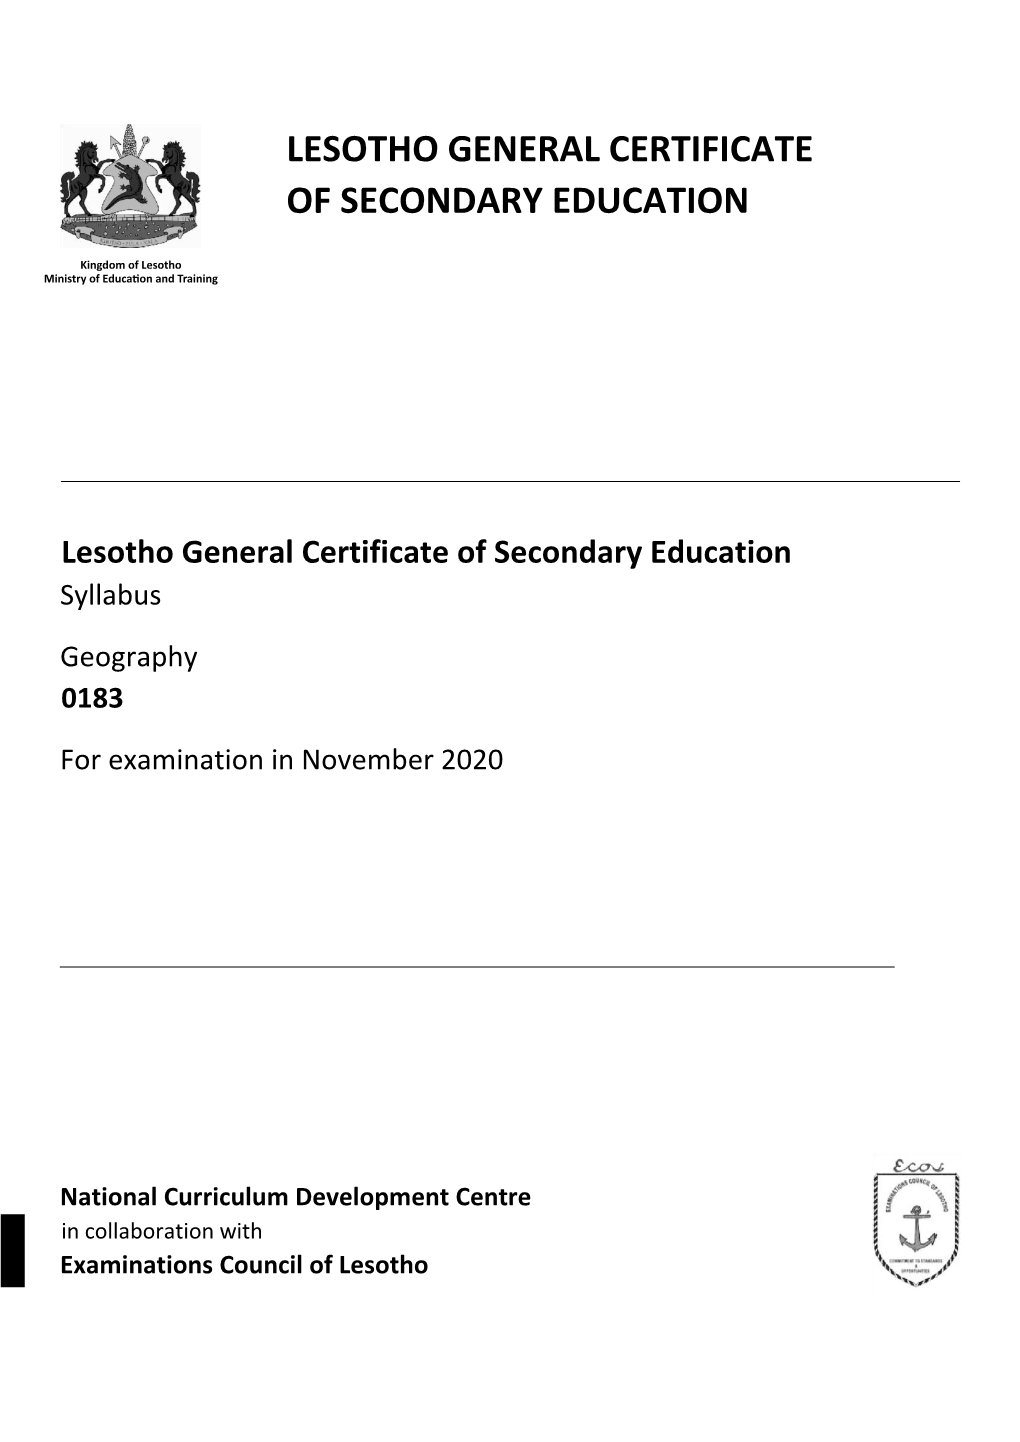 Lesotho General Certificate of Secondary Education Syllabus